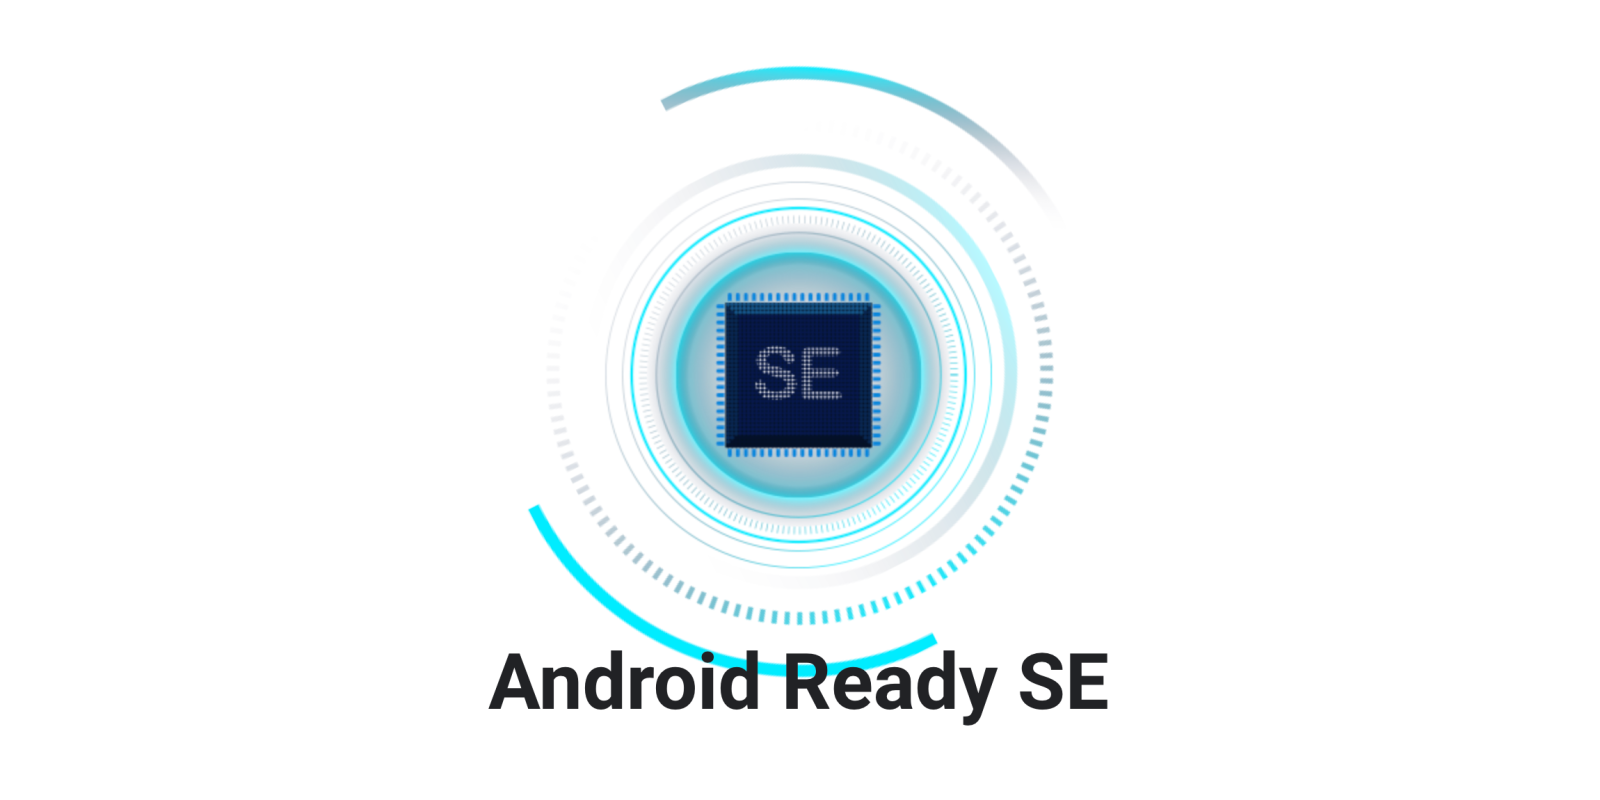 Google's Android Ready SE Alliance to boost digital keys, IDs - 9to5Google